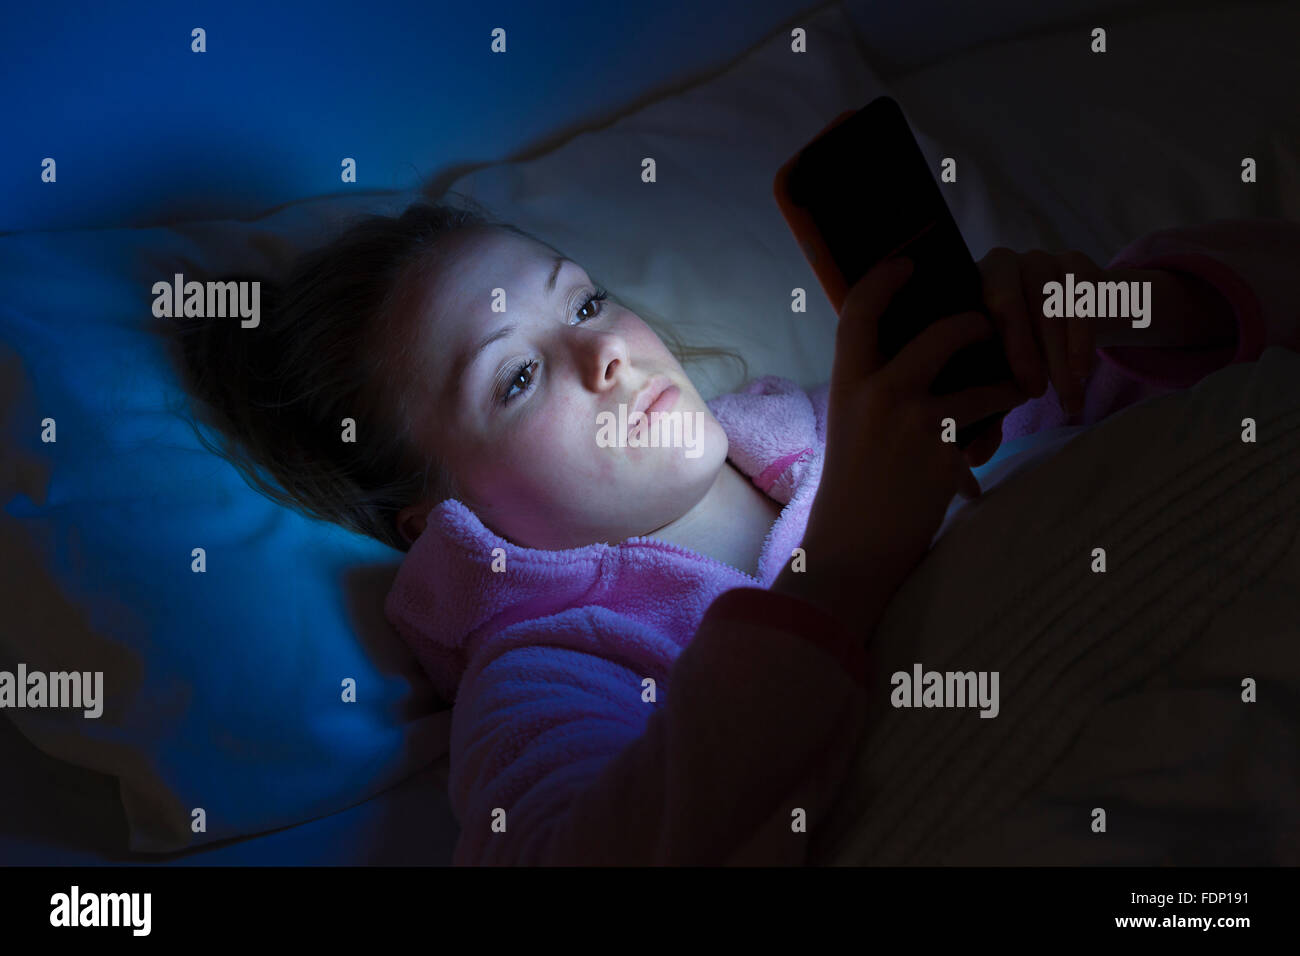 Young teenage girl using smartphone at night in bed. She might be texting watching a movie or surfing the internet.. Use of smartphone at night Stock Photo